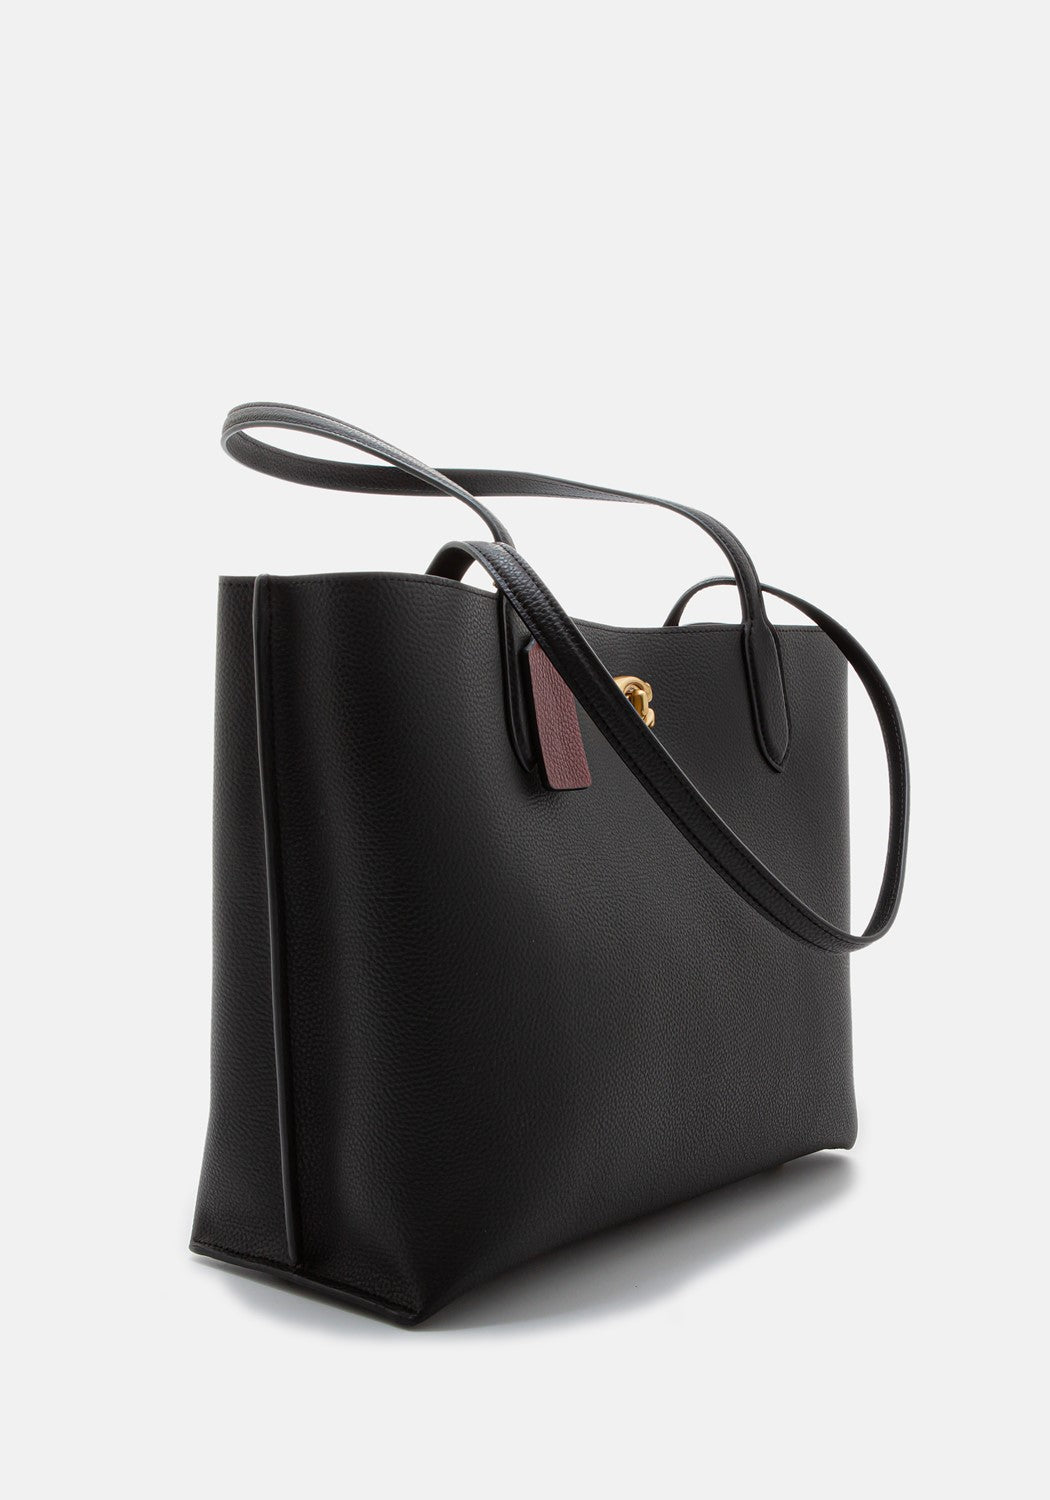 Willow Tote Polished Pebble Leather blac | Bildmaterial bereitgestellt von SHOES.PLEASE.